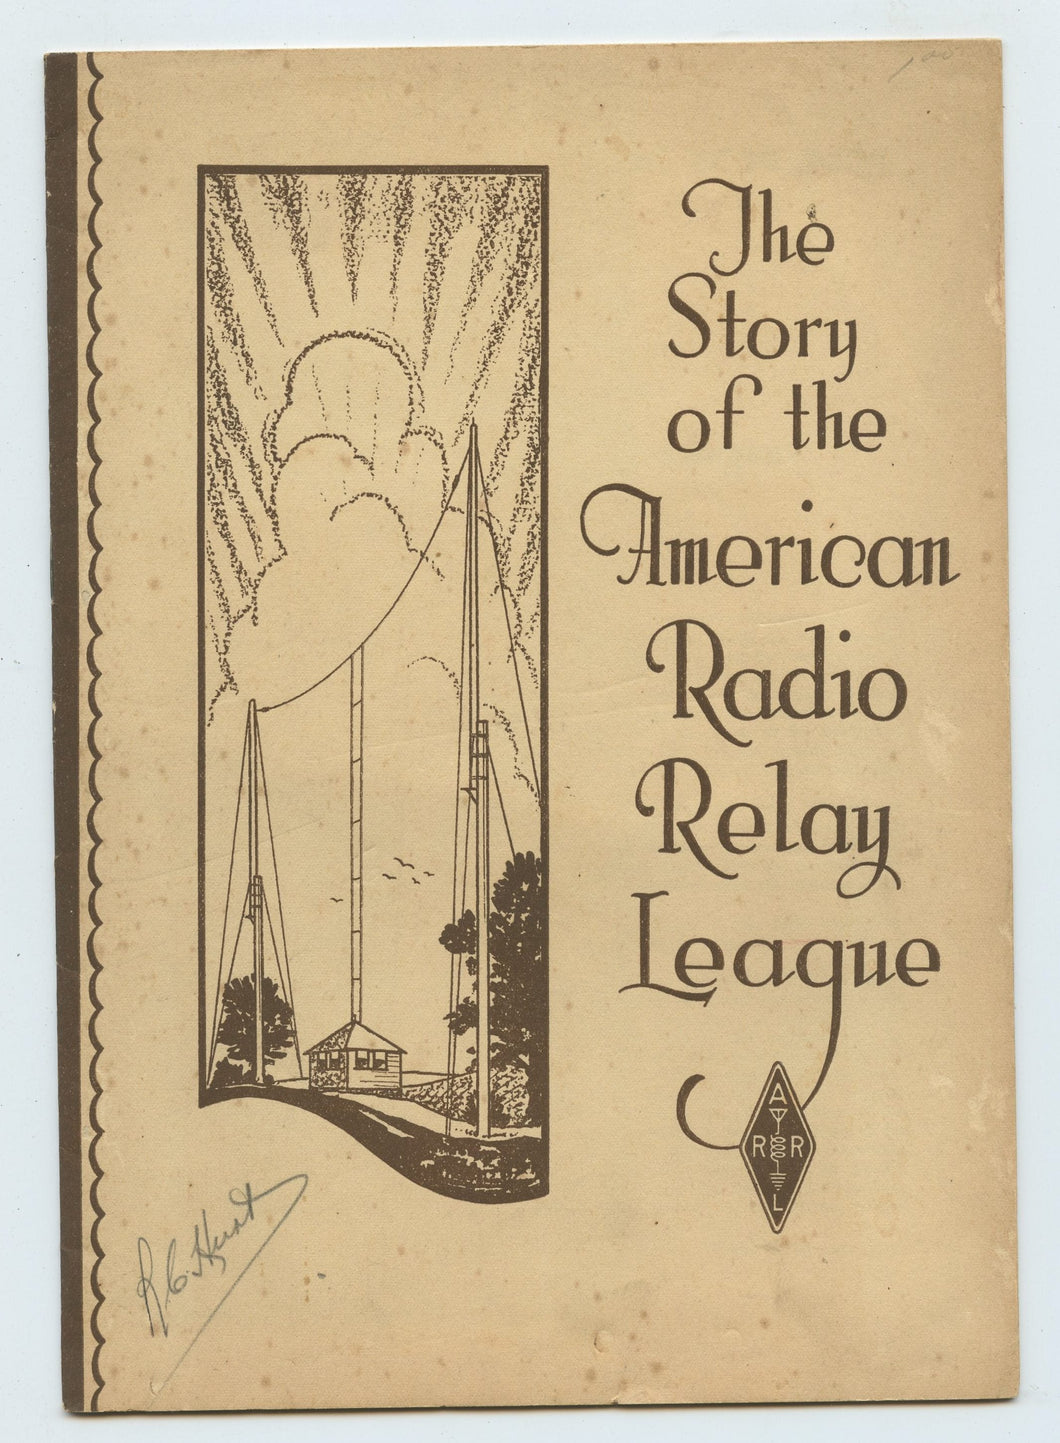 The Story of the American Radio Relay League